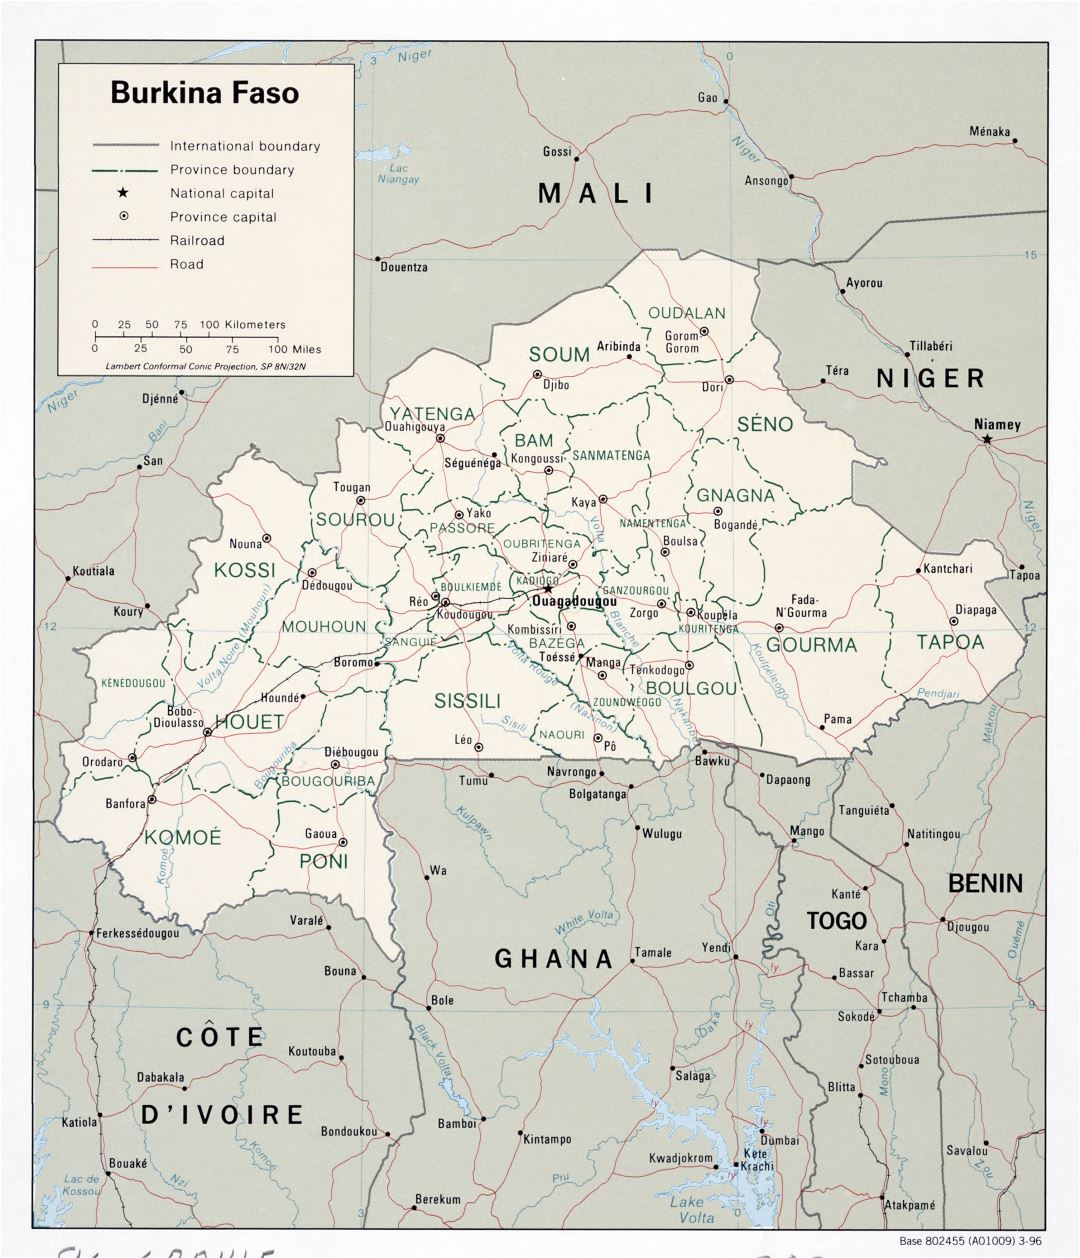 Large scale political and administrative map of Burkina Faso with roads, railroads and major cities - 1996